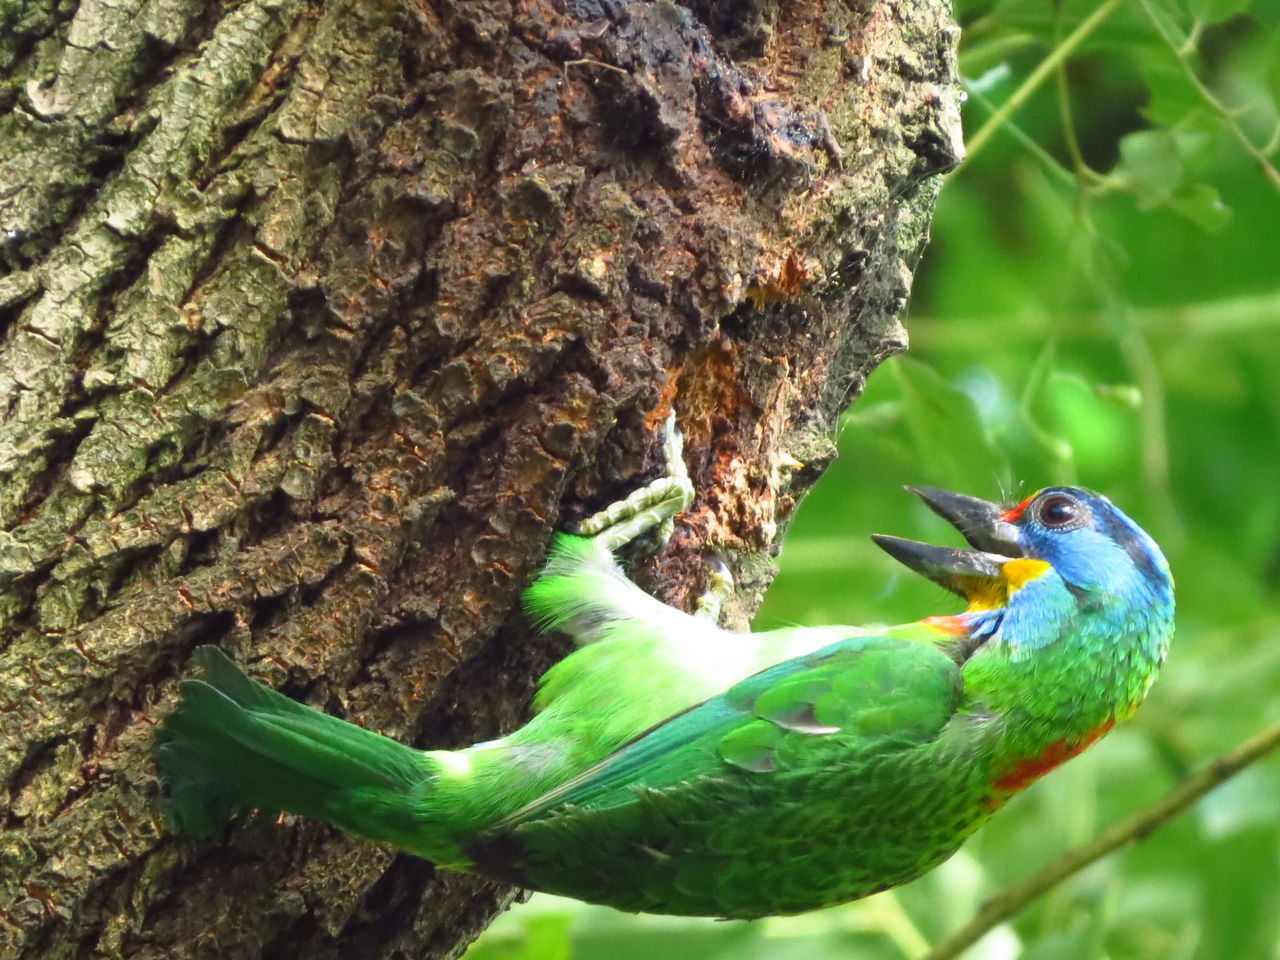 CLOSE-UP OF PARROT PERCHING ON TREE TRUNK